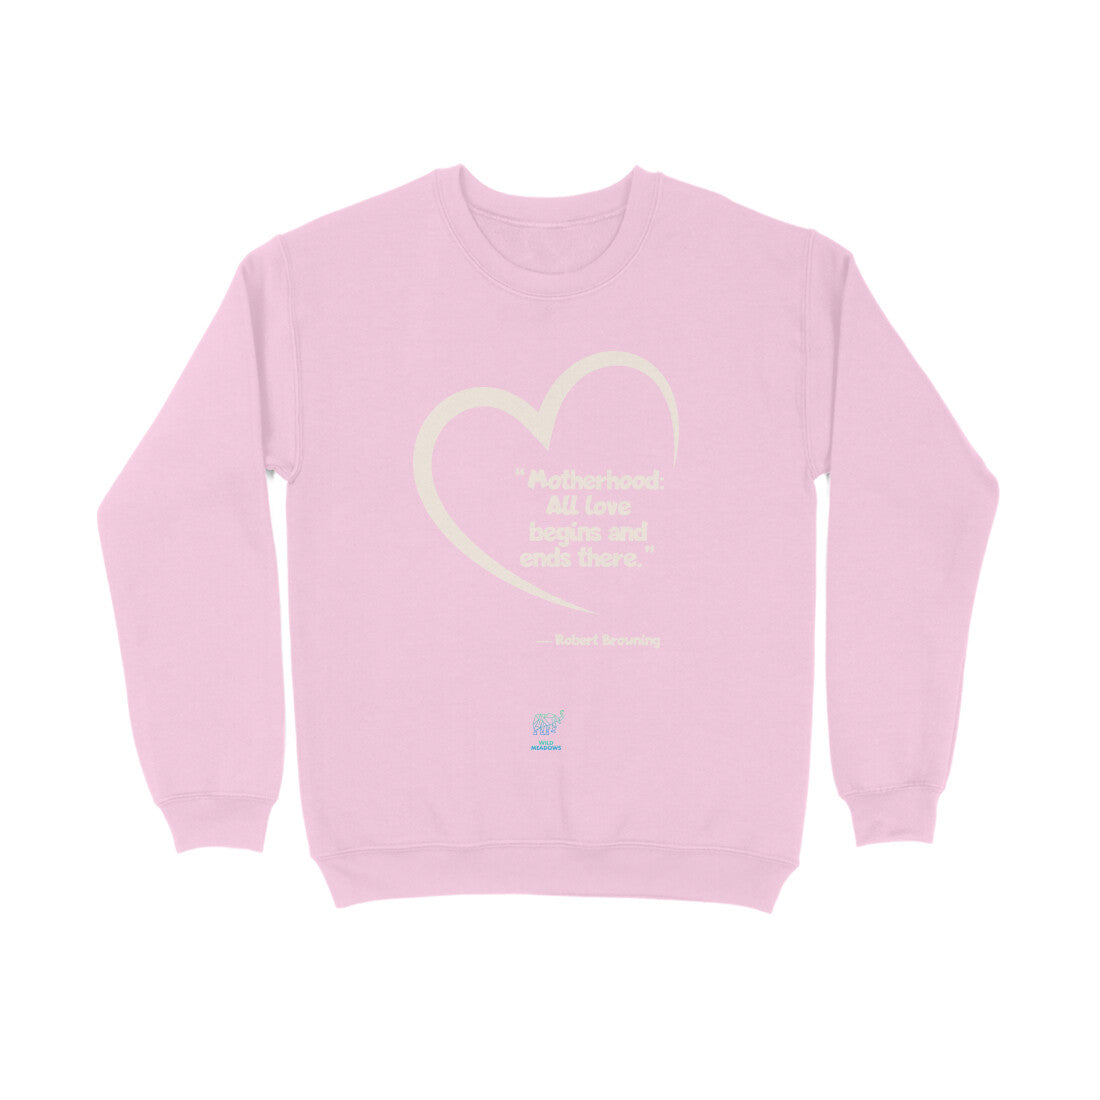 Mother-All love begins and ends there - Unisex Sweatshirt